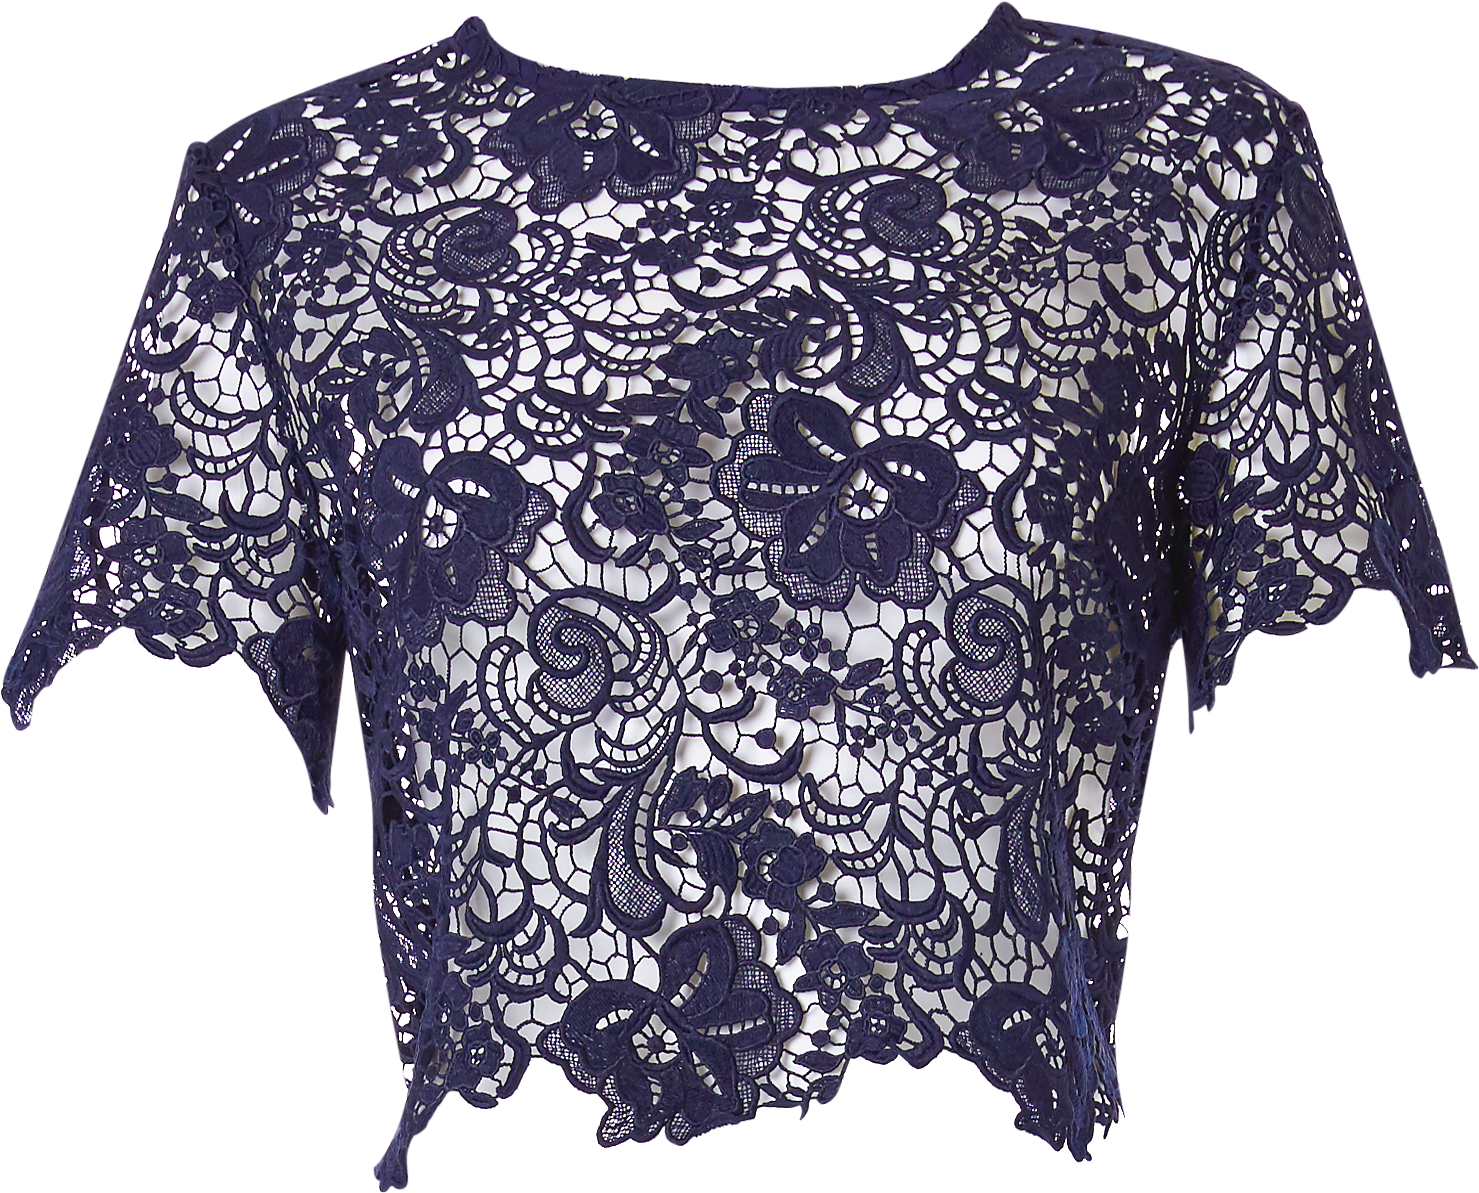 A Blue Lace Top With A Black Background